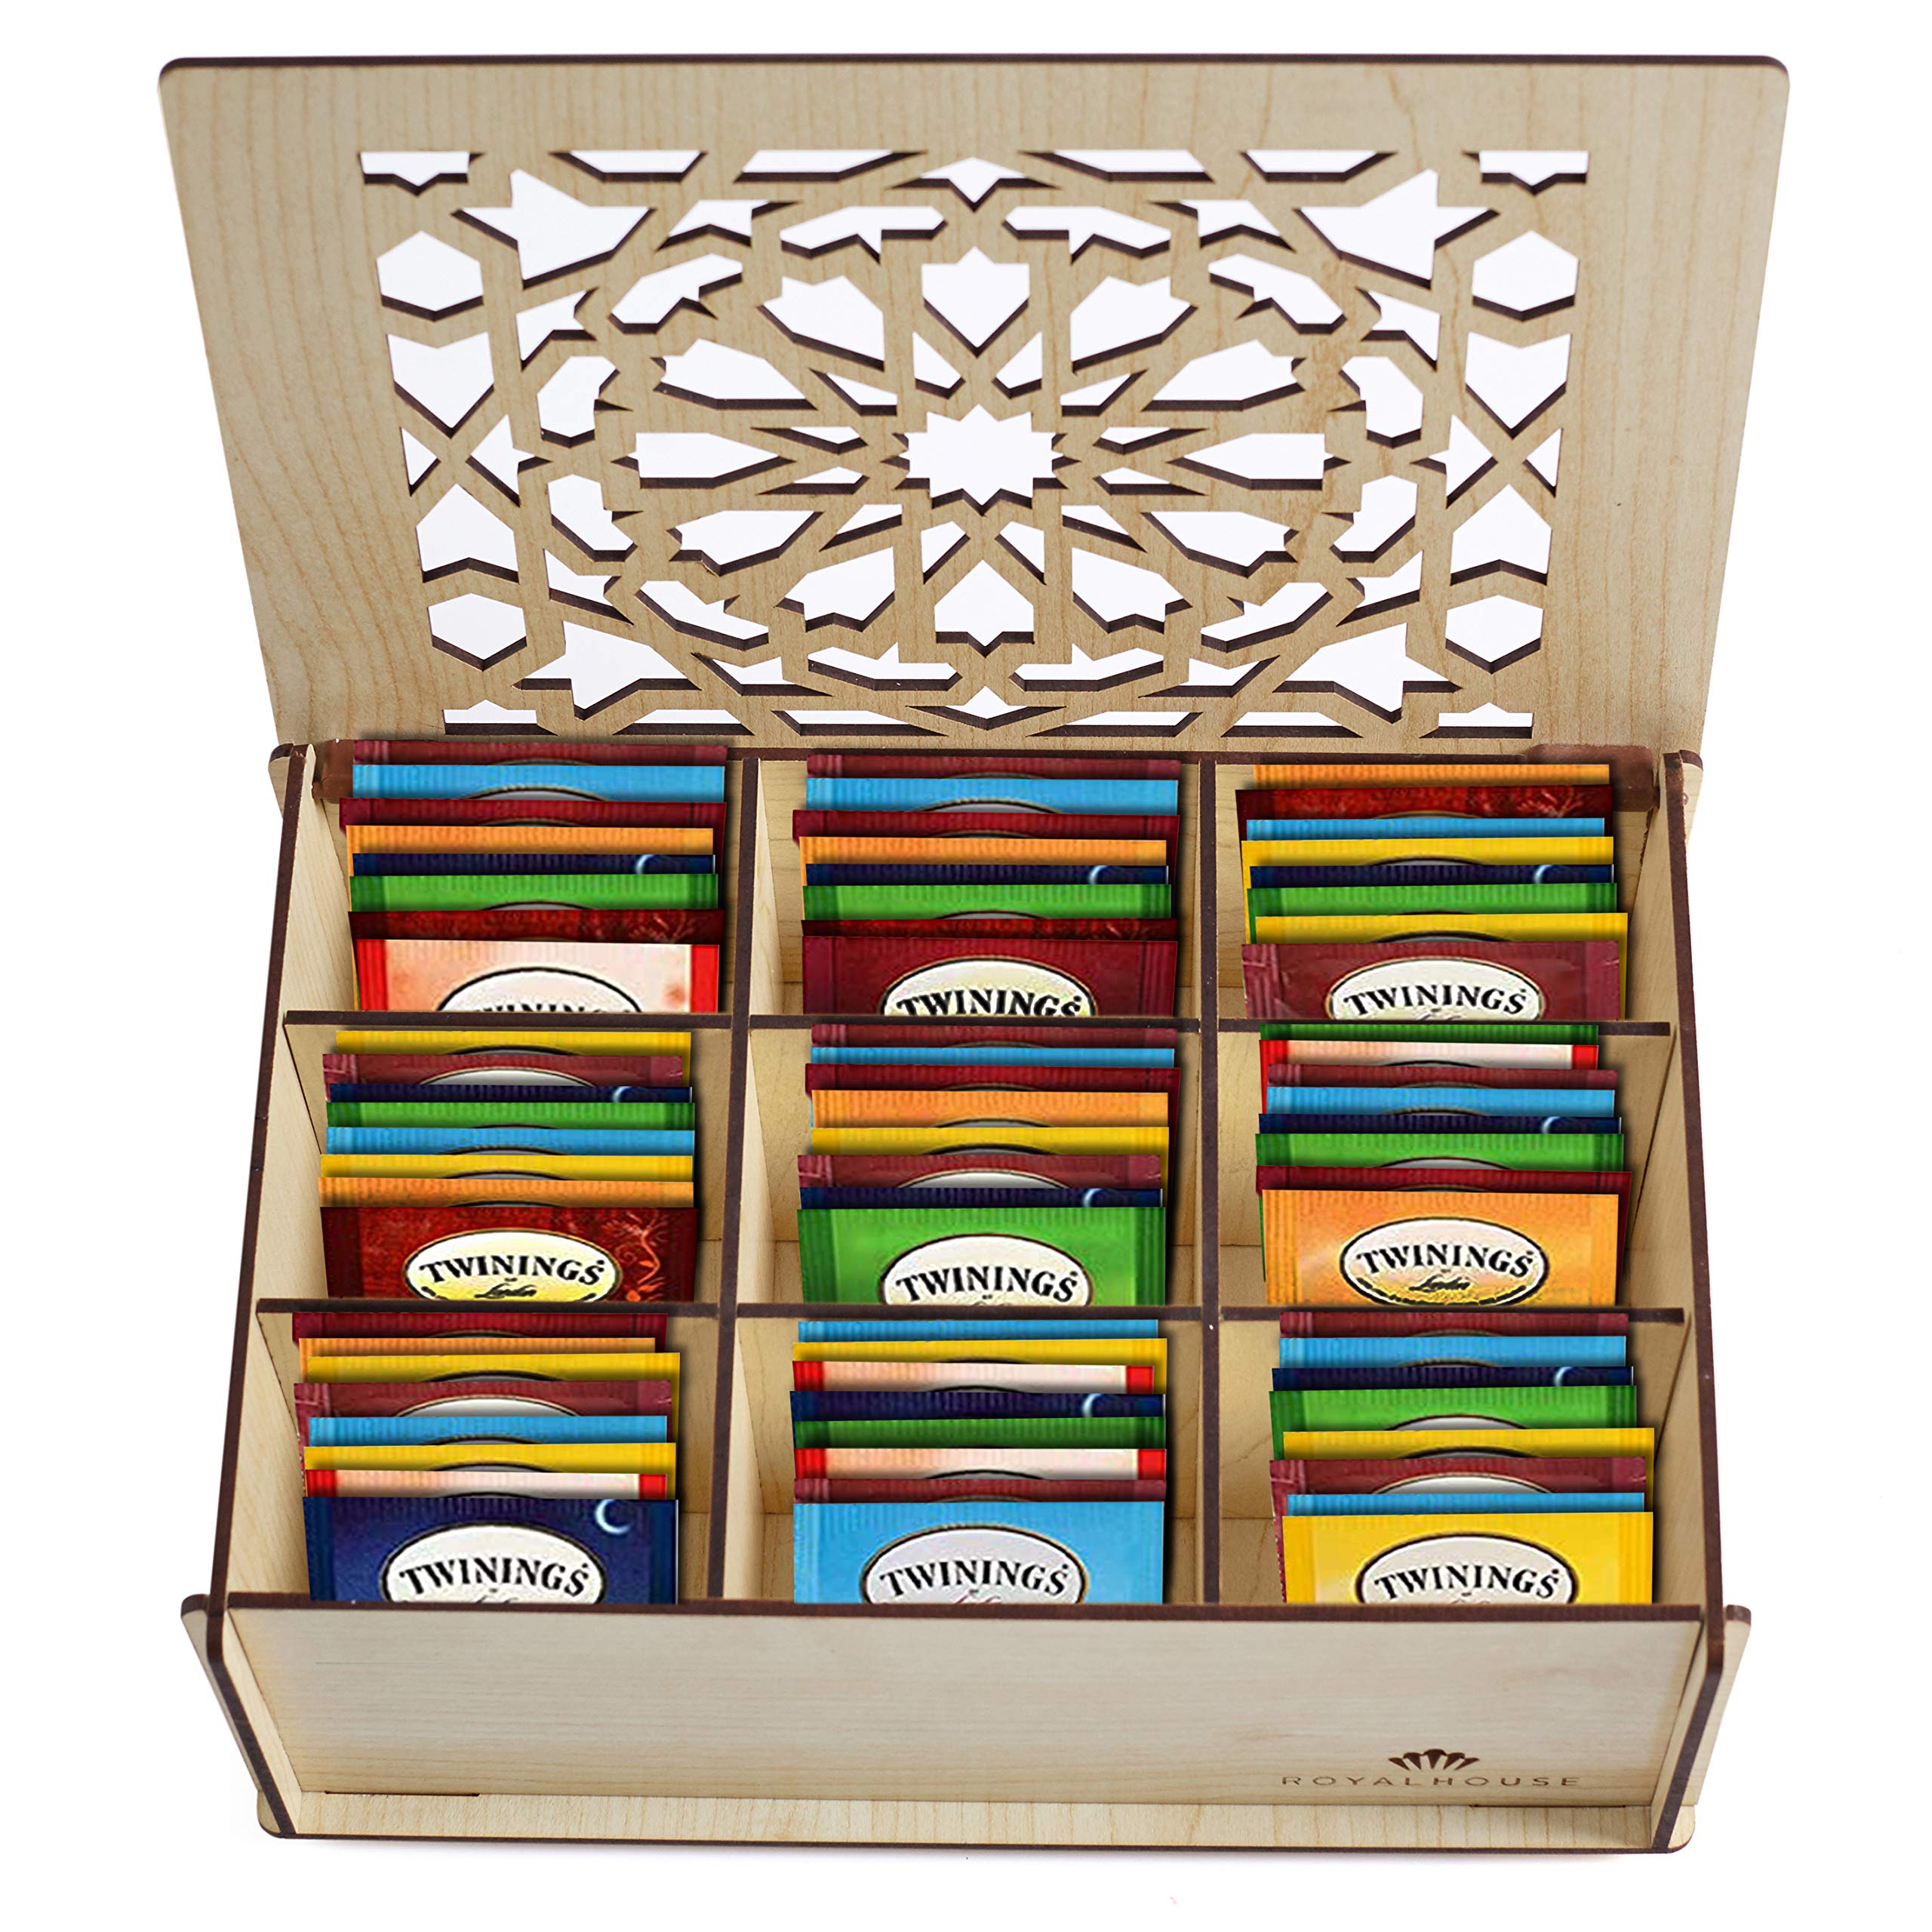 Twinings Tea Bags Sampler Assortment Box - 80 COUNT - Perfect Variety Pack in Wood (MDF) Gift Box - Gift for Family, Friends, Coworkers (White)…